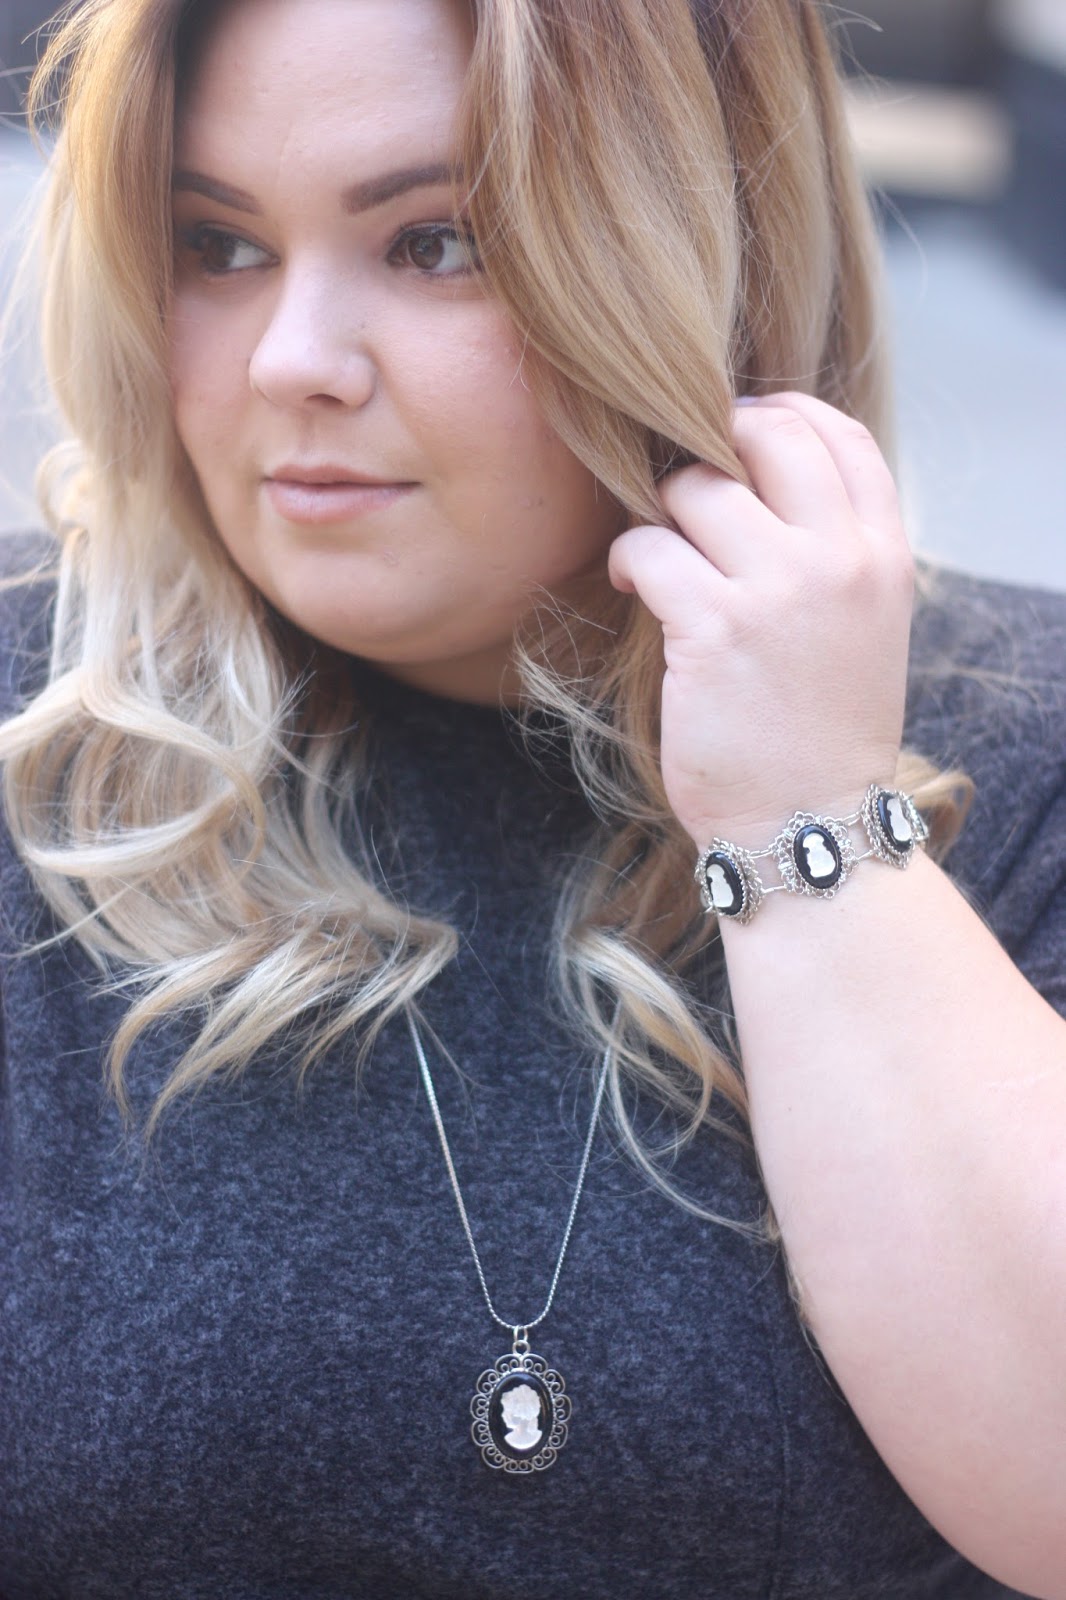 natalie craig, natalie in the city, vintage meet modern, plus size fashion blogger, vintage jewelery, chicago blogger, midwest blogger, lifestyle blogger, fall accessories, fall fashion